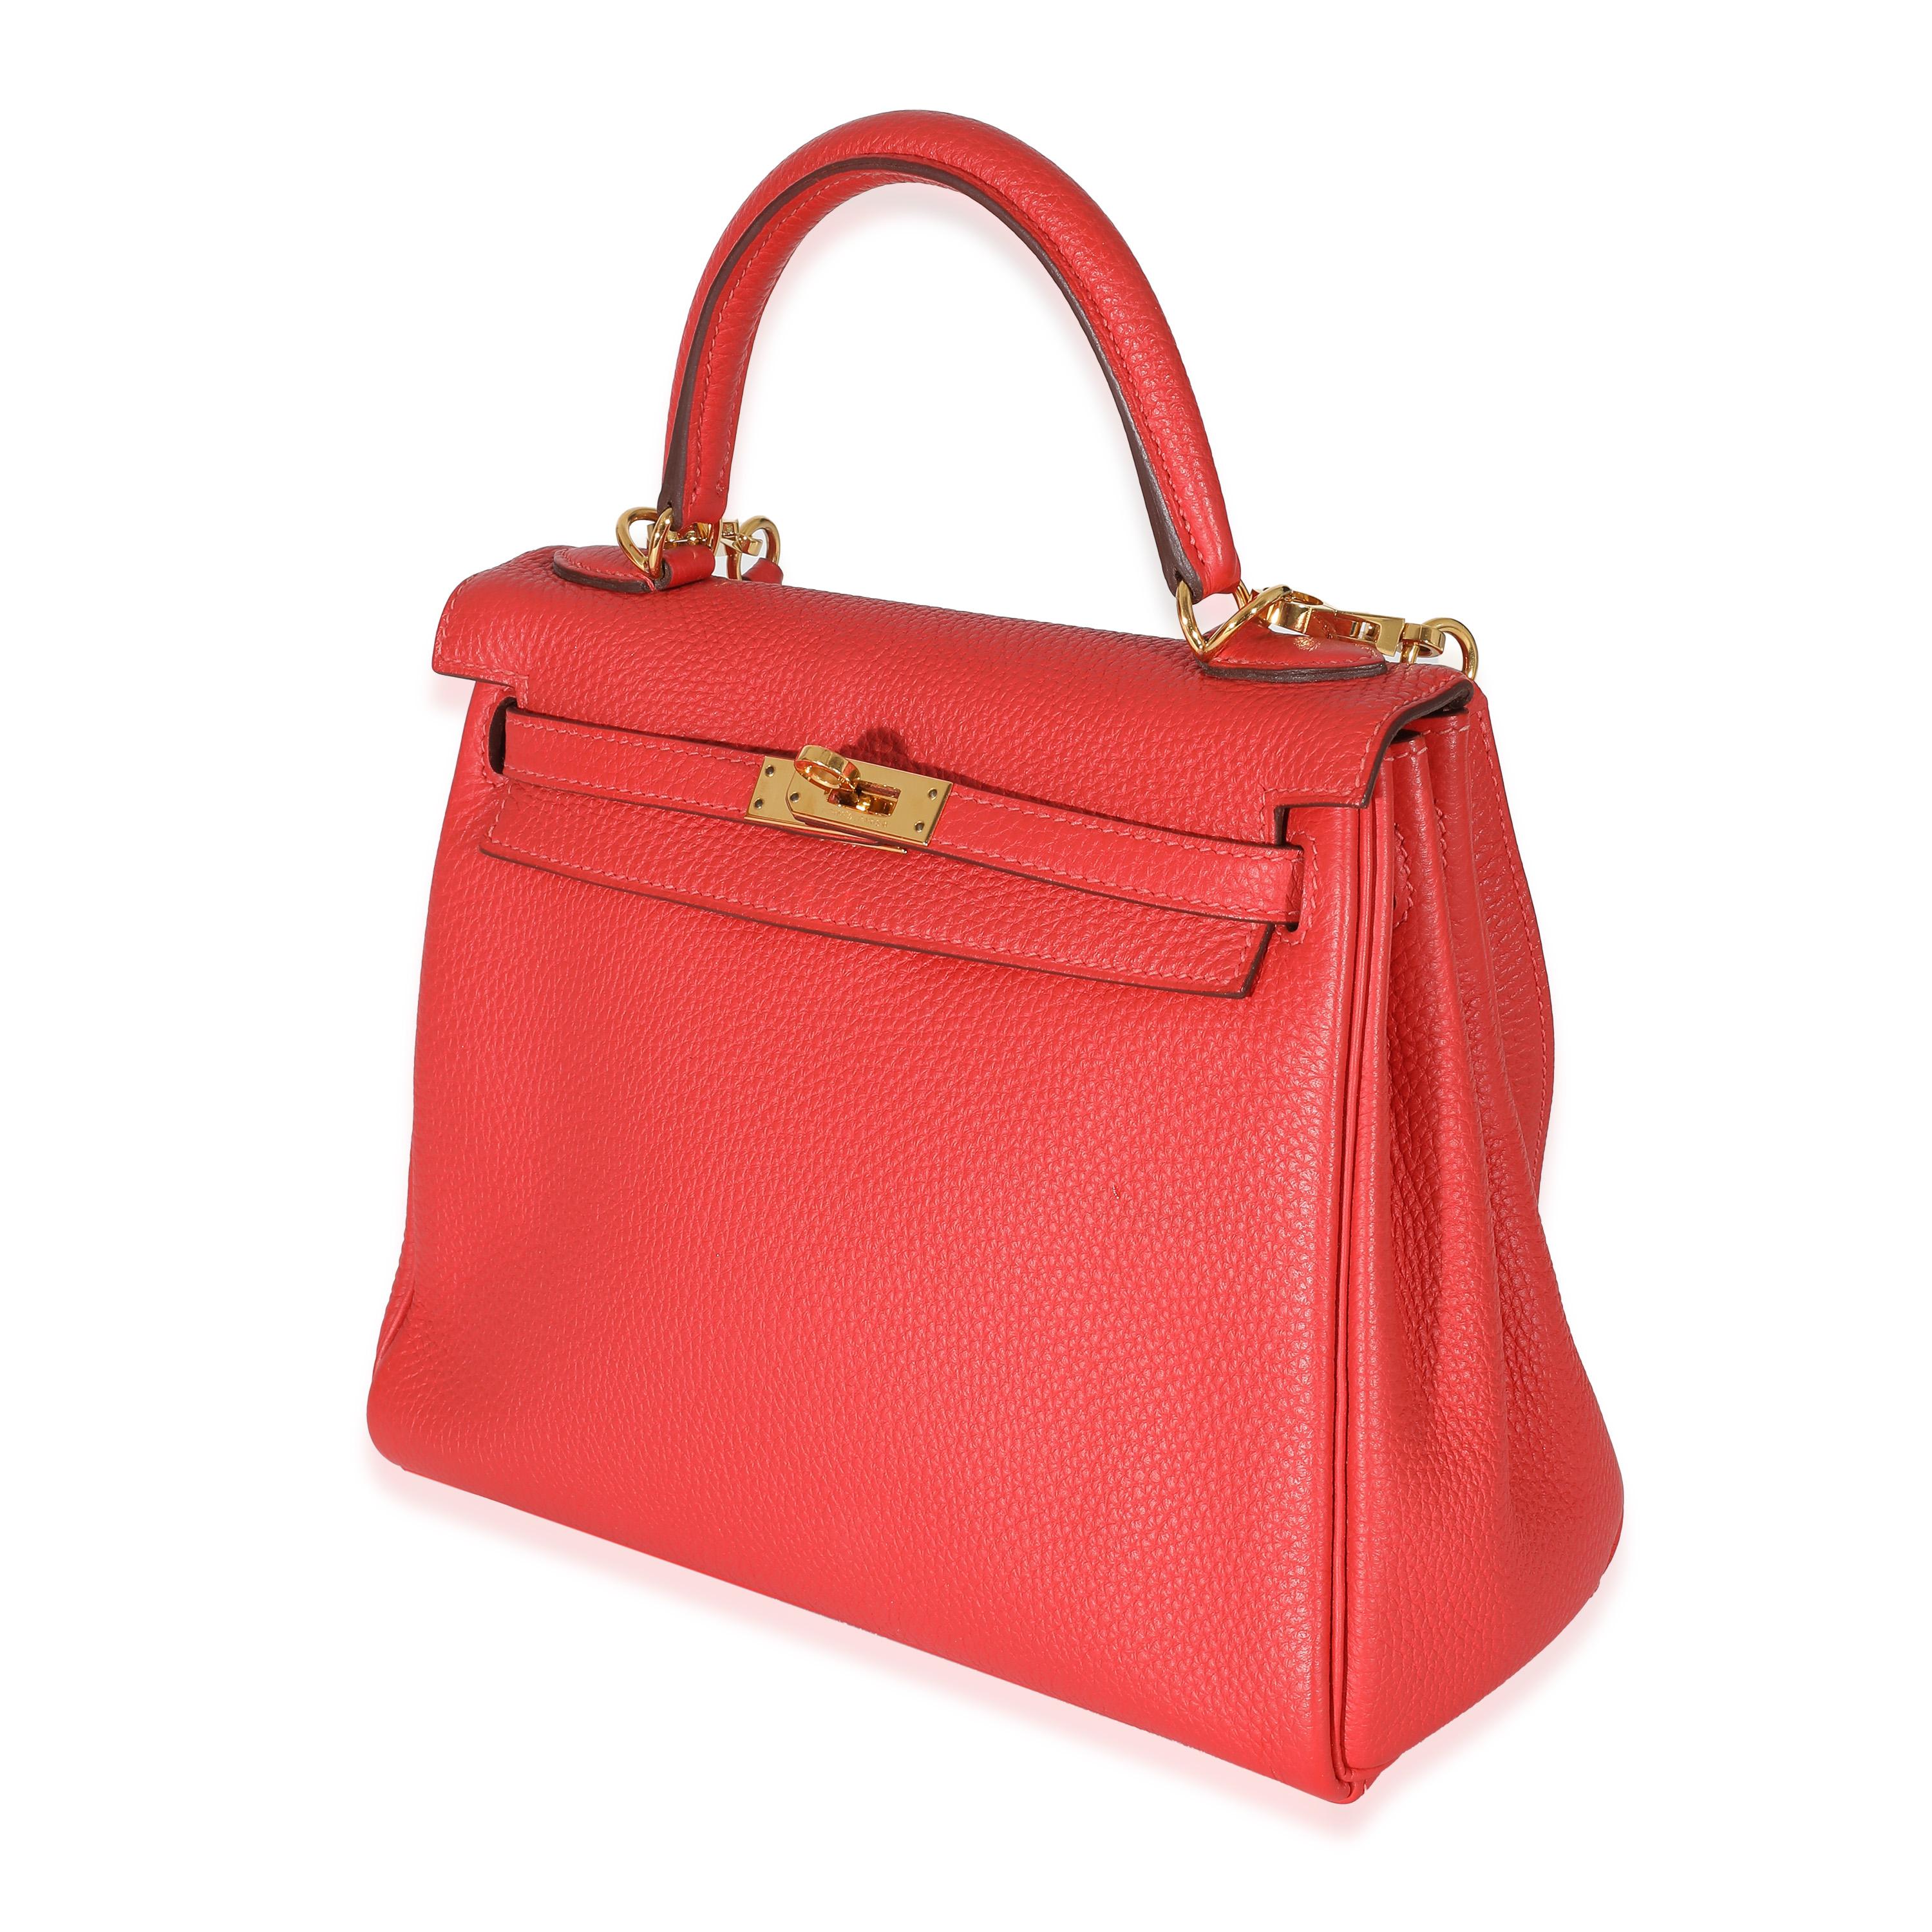 Hermes Geranium Togo Kelly 25 GHW In Excellent Condition For Sale In New York, NY